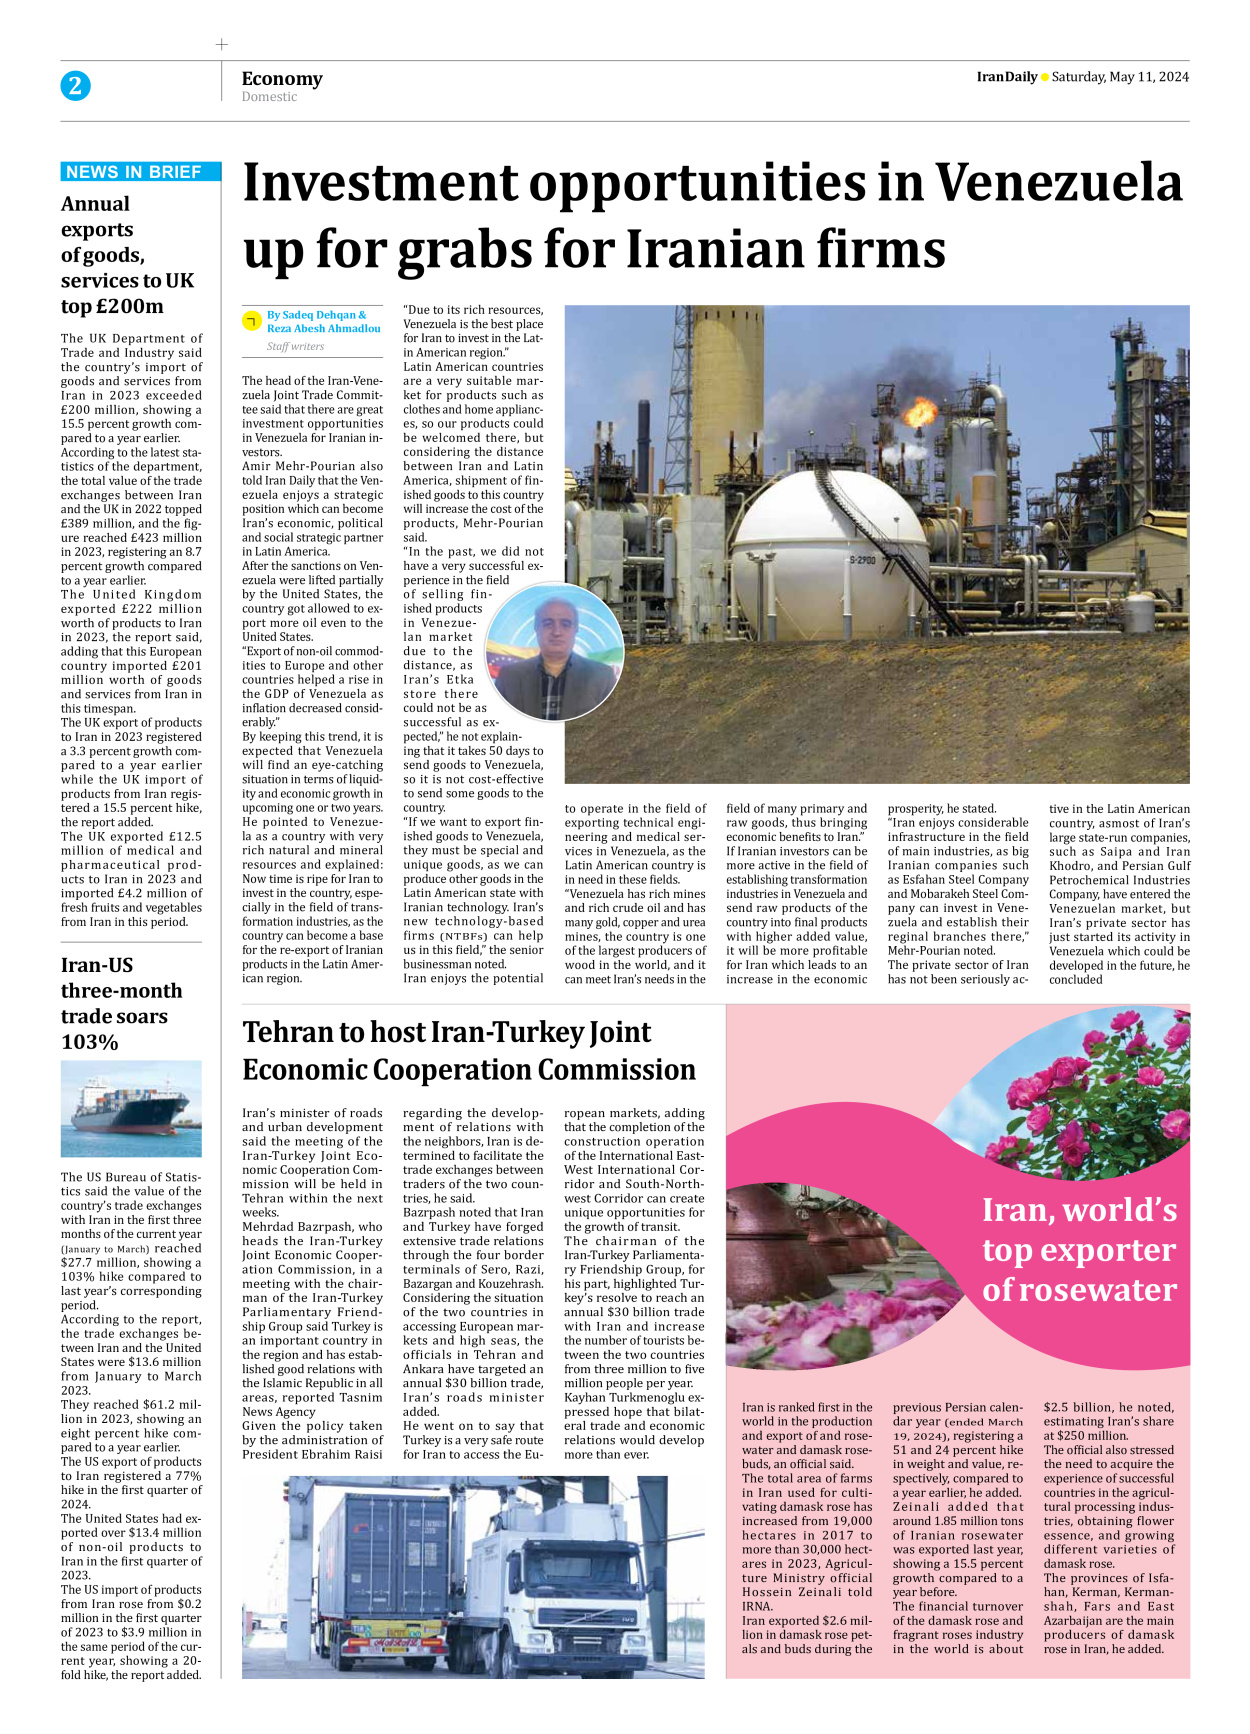 Iran Daily - Number Seven Thousand Five Hundred and Fifty Four - 11 May 2024 - Page 2